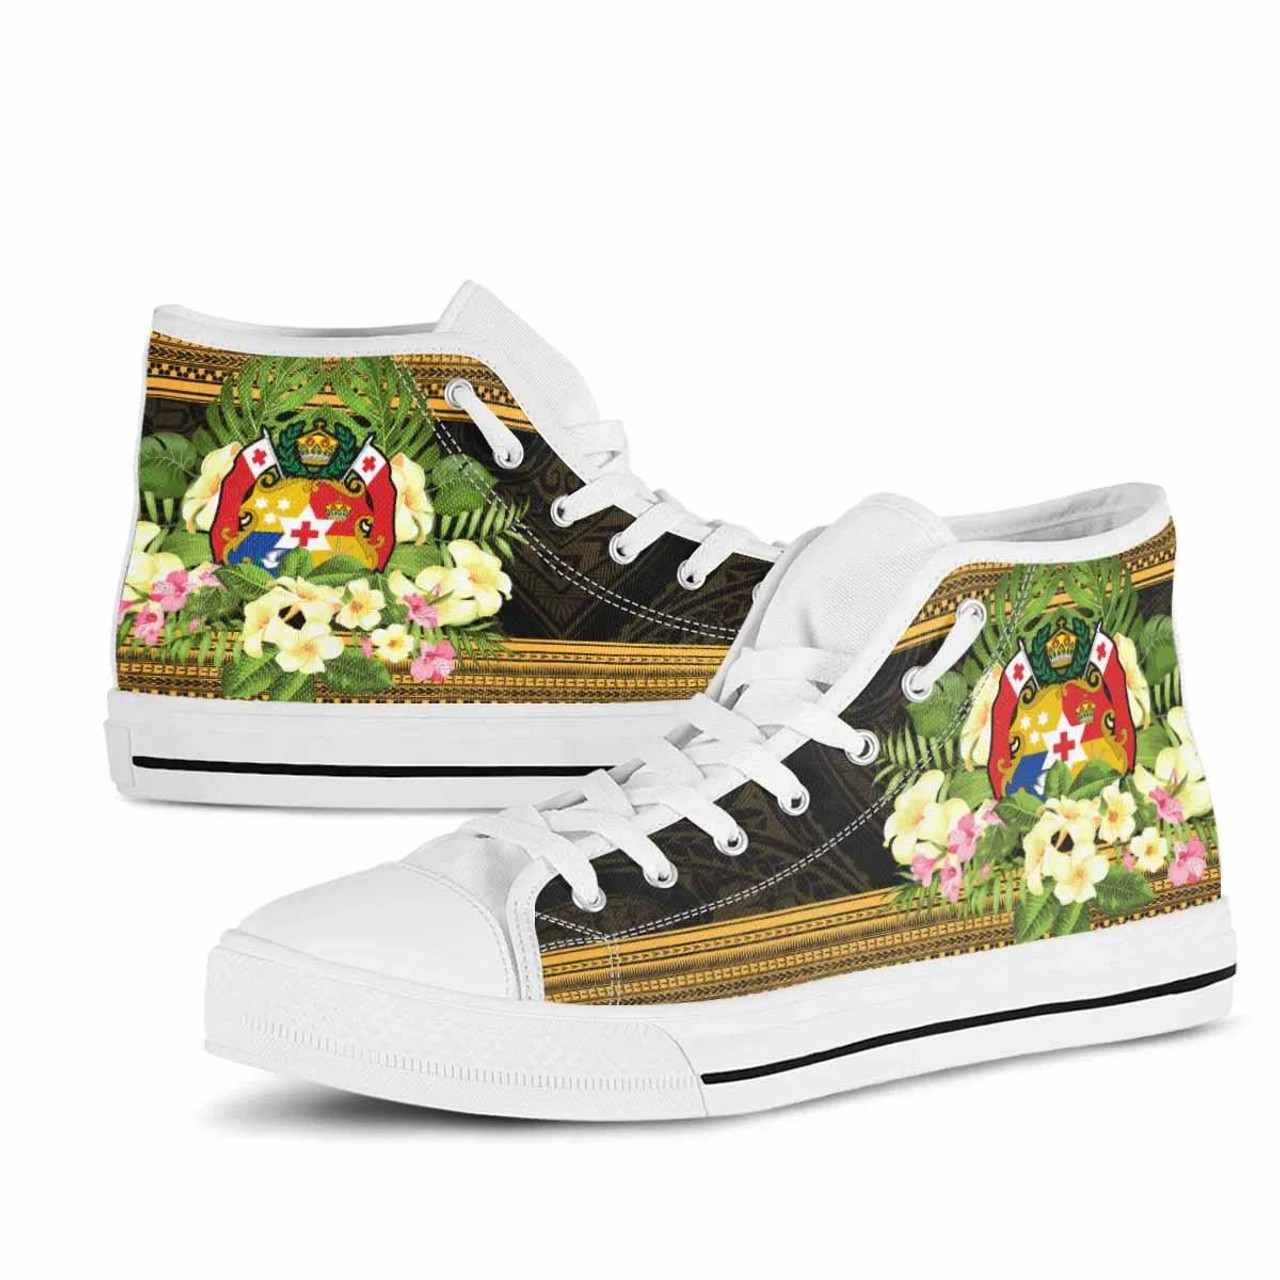 Tonga High Top Shoes - Polynesian Gold Patterns Collection 10